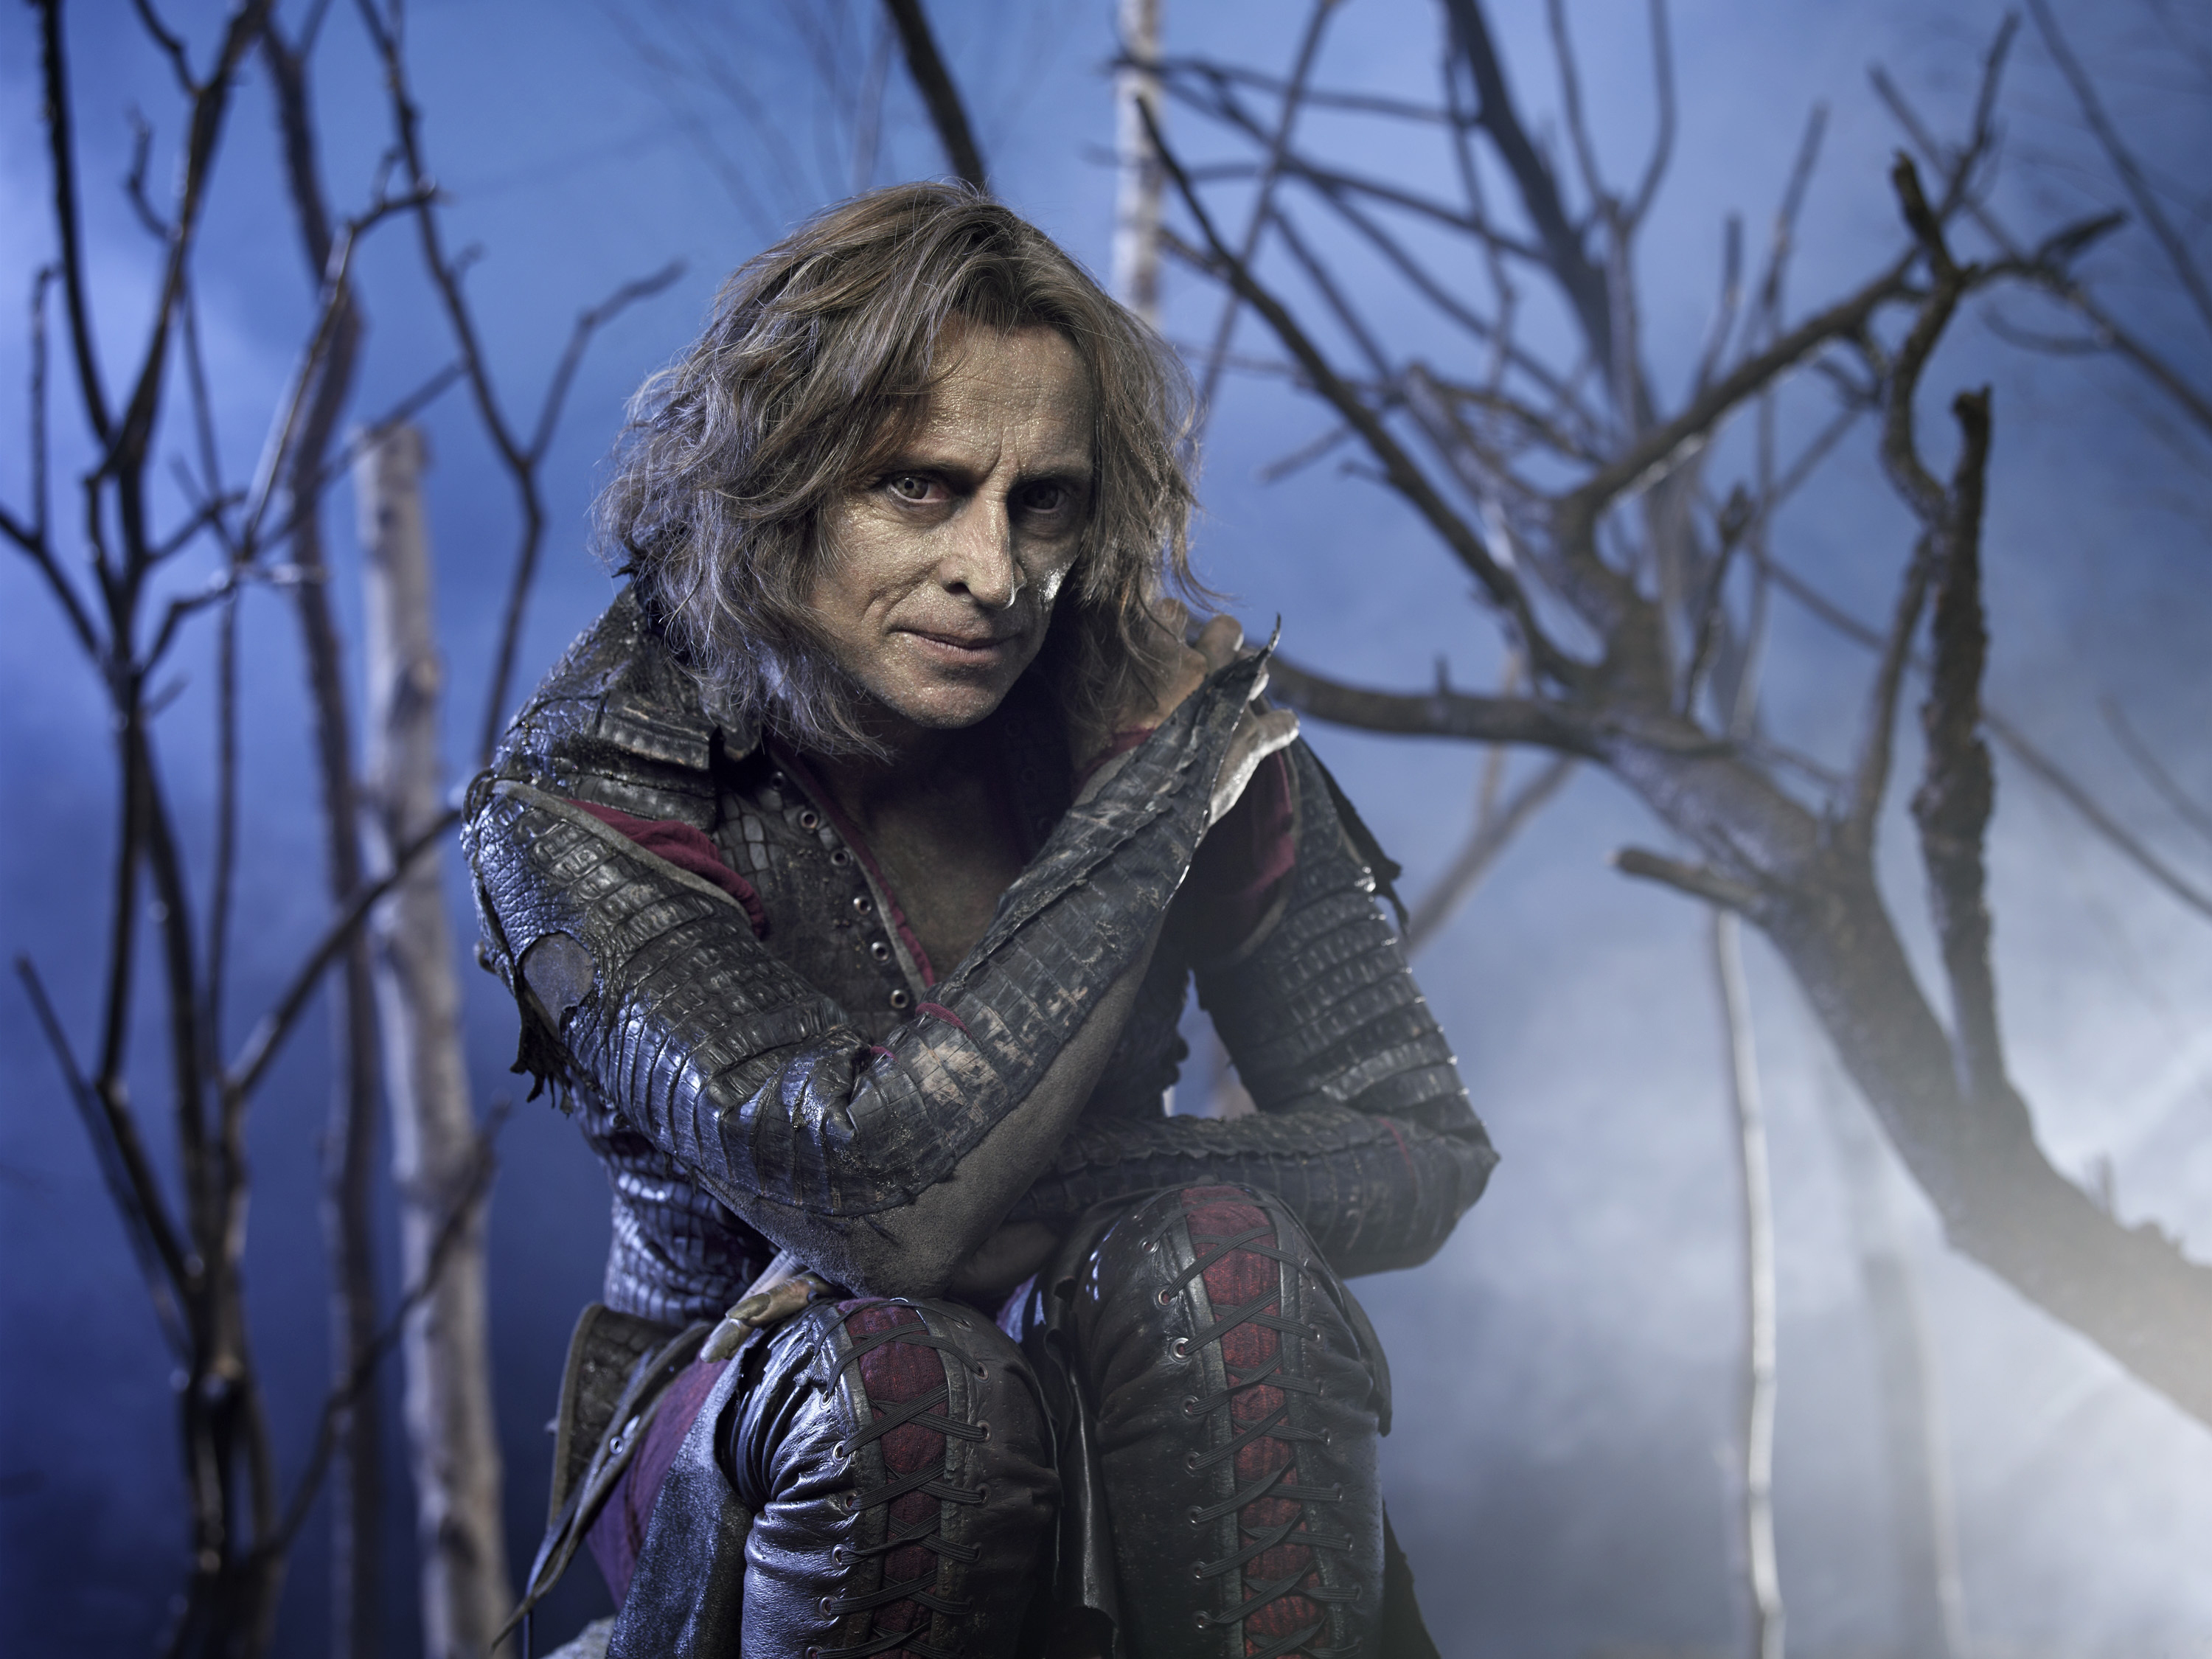 Fantasy Robert Carlyle Rumpelstiltskin Fairy Tale Wizard Once Upon A Time 3000x2250